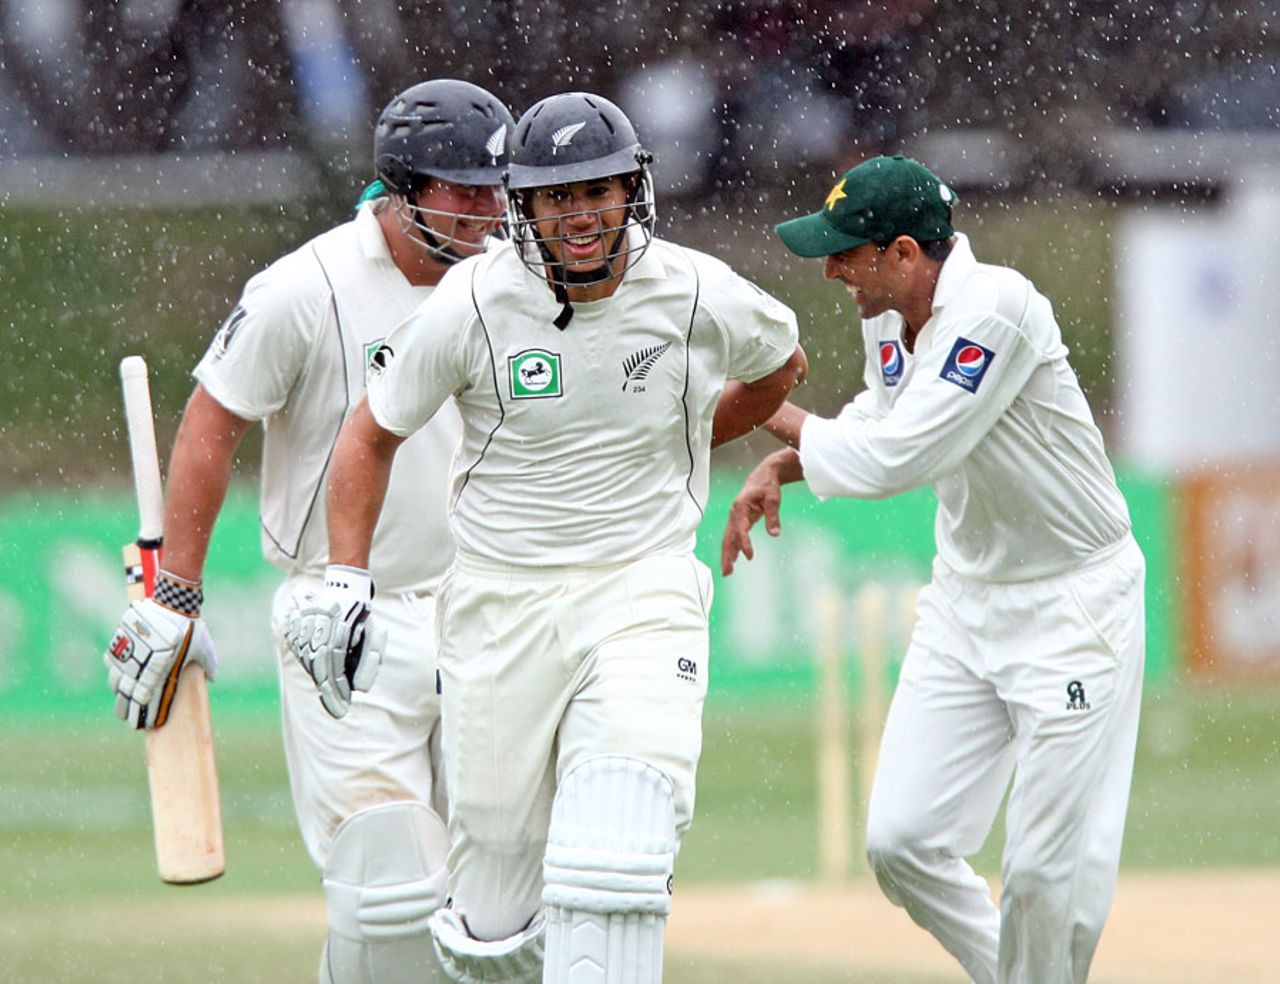 Ross Taylor, Jesse Ryder and Younis Khan sprint off as the rain arrives, New Zealand v Pakistan, 2nd Test, Wellington, 4th day, January 18, 2011